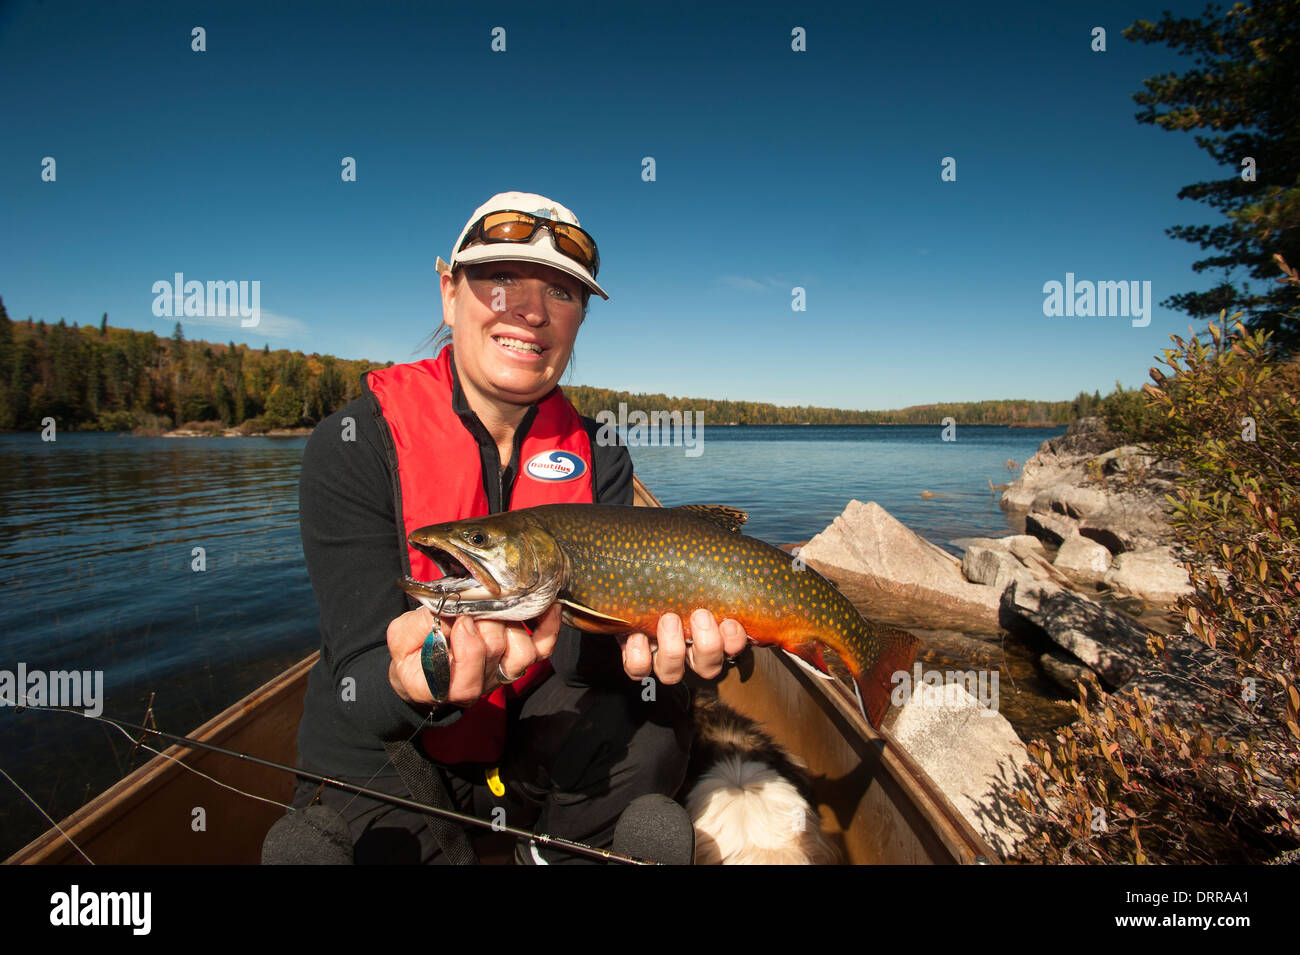 Woman angler holding a summer brook trout she caught in a lake in Northern Ontario. Stock Photo